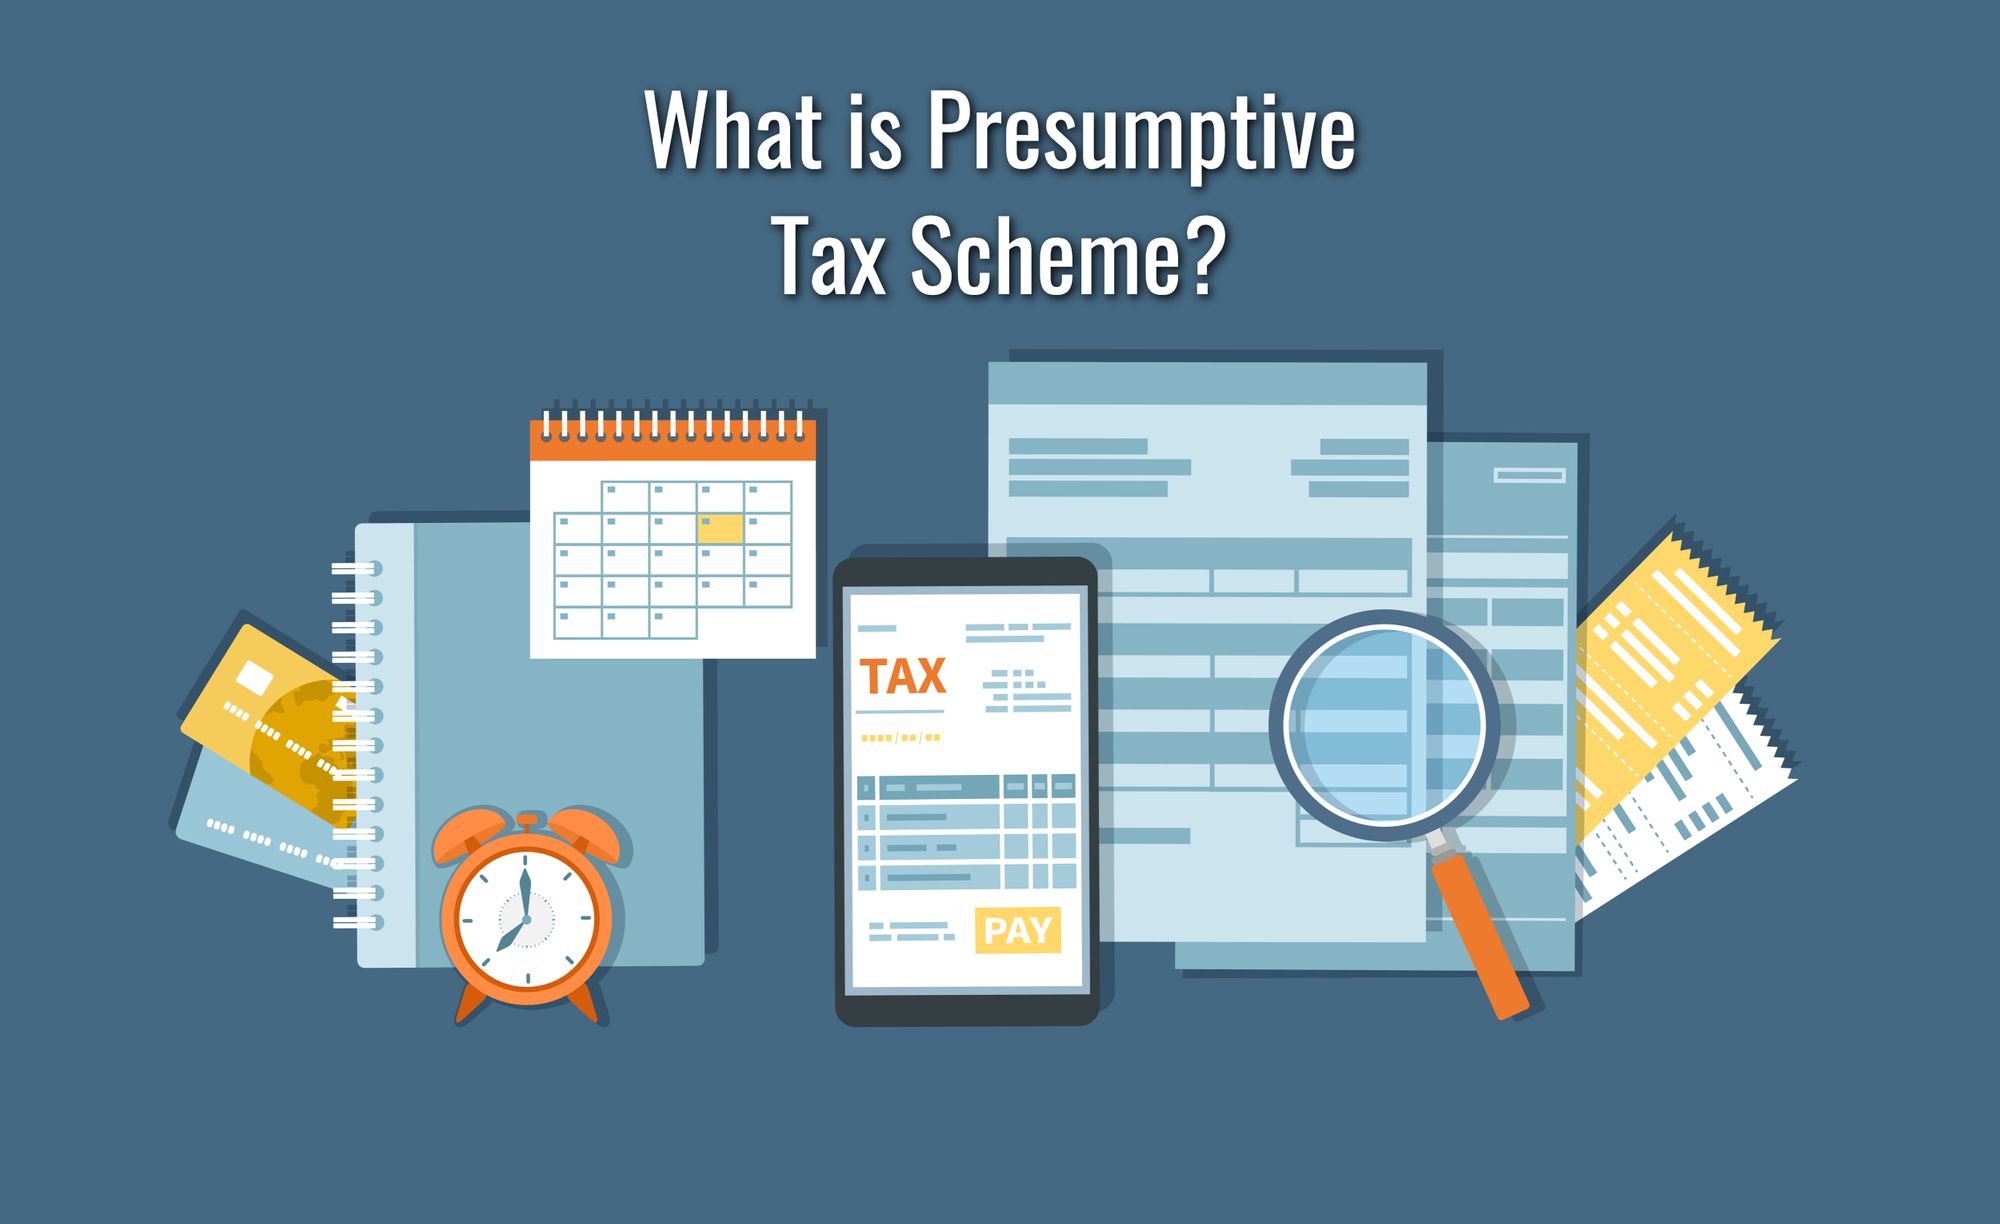 Presumptive taxation: The scheme that eases burden on small businesses